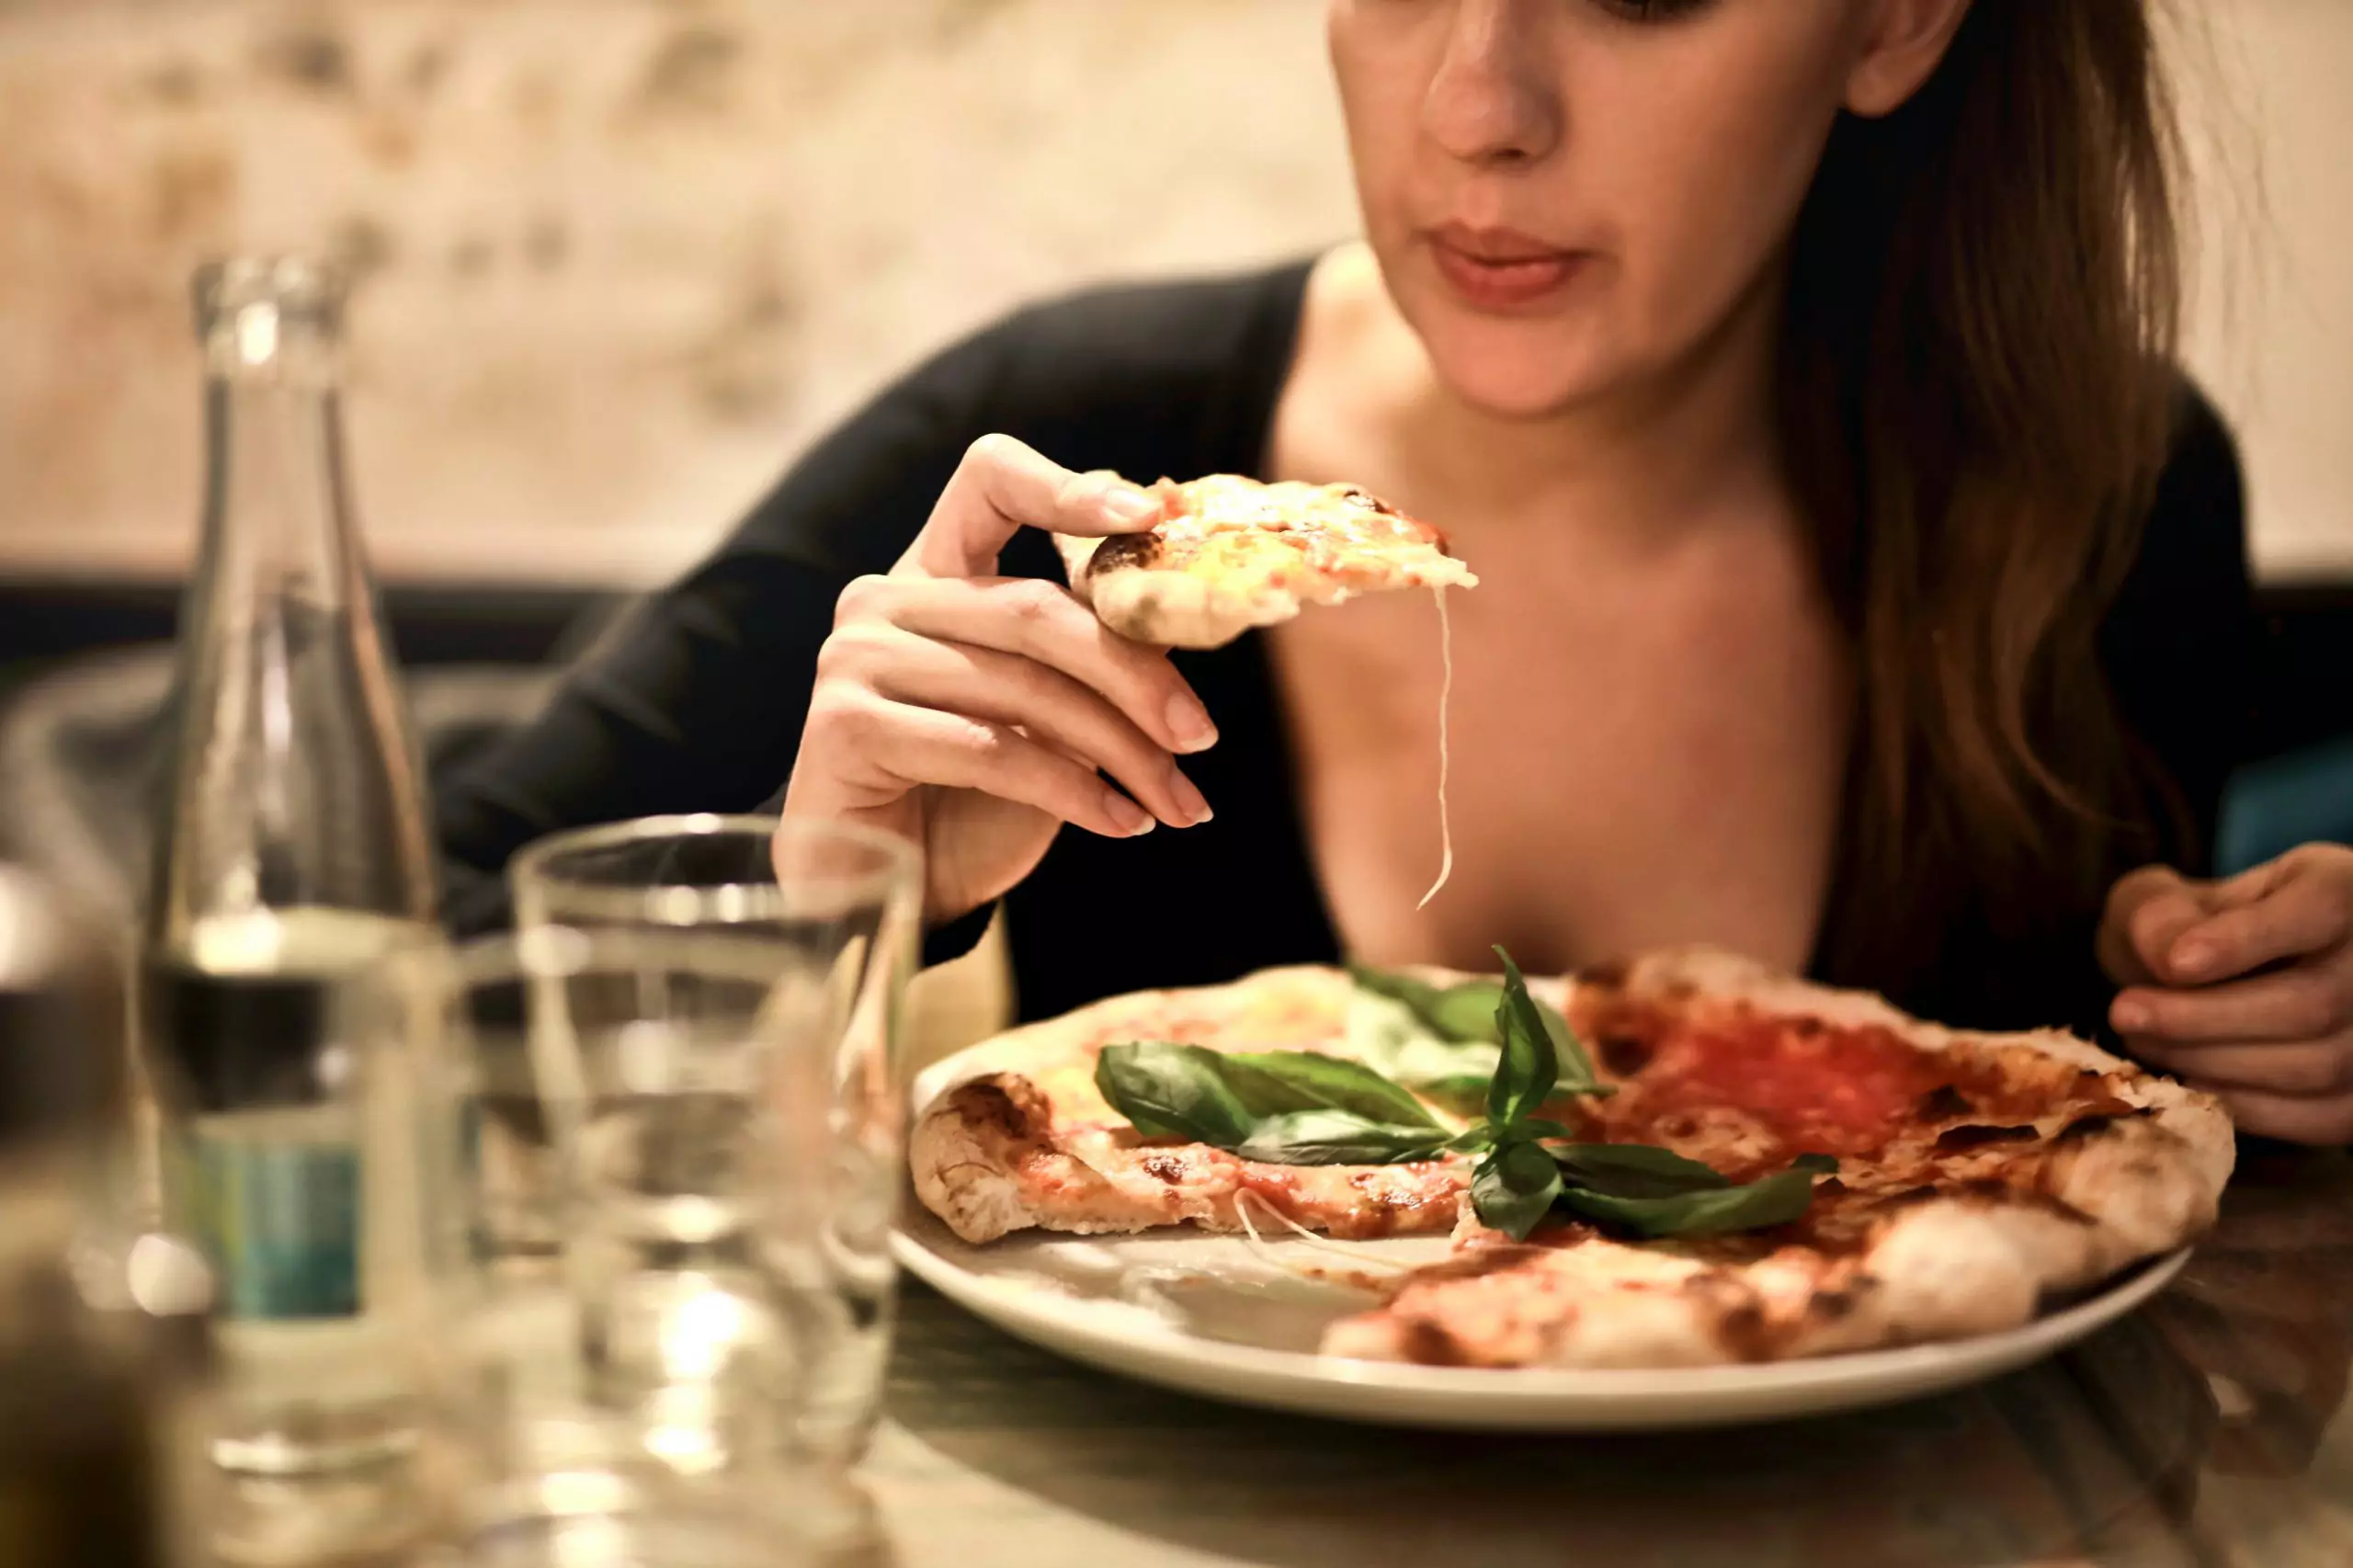 Woman eating pizza as a comfort food for fibroids symptoms